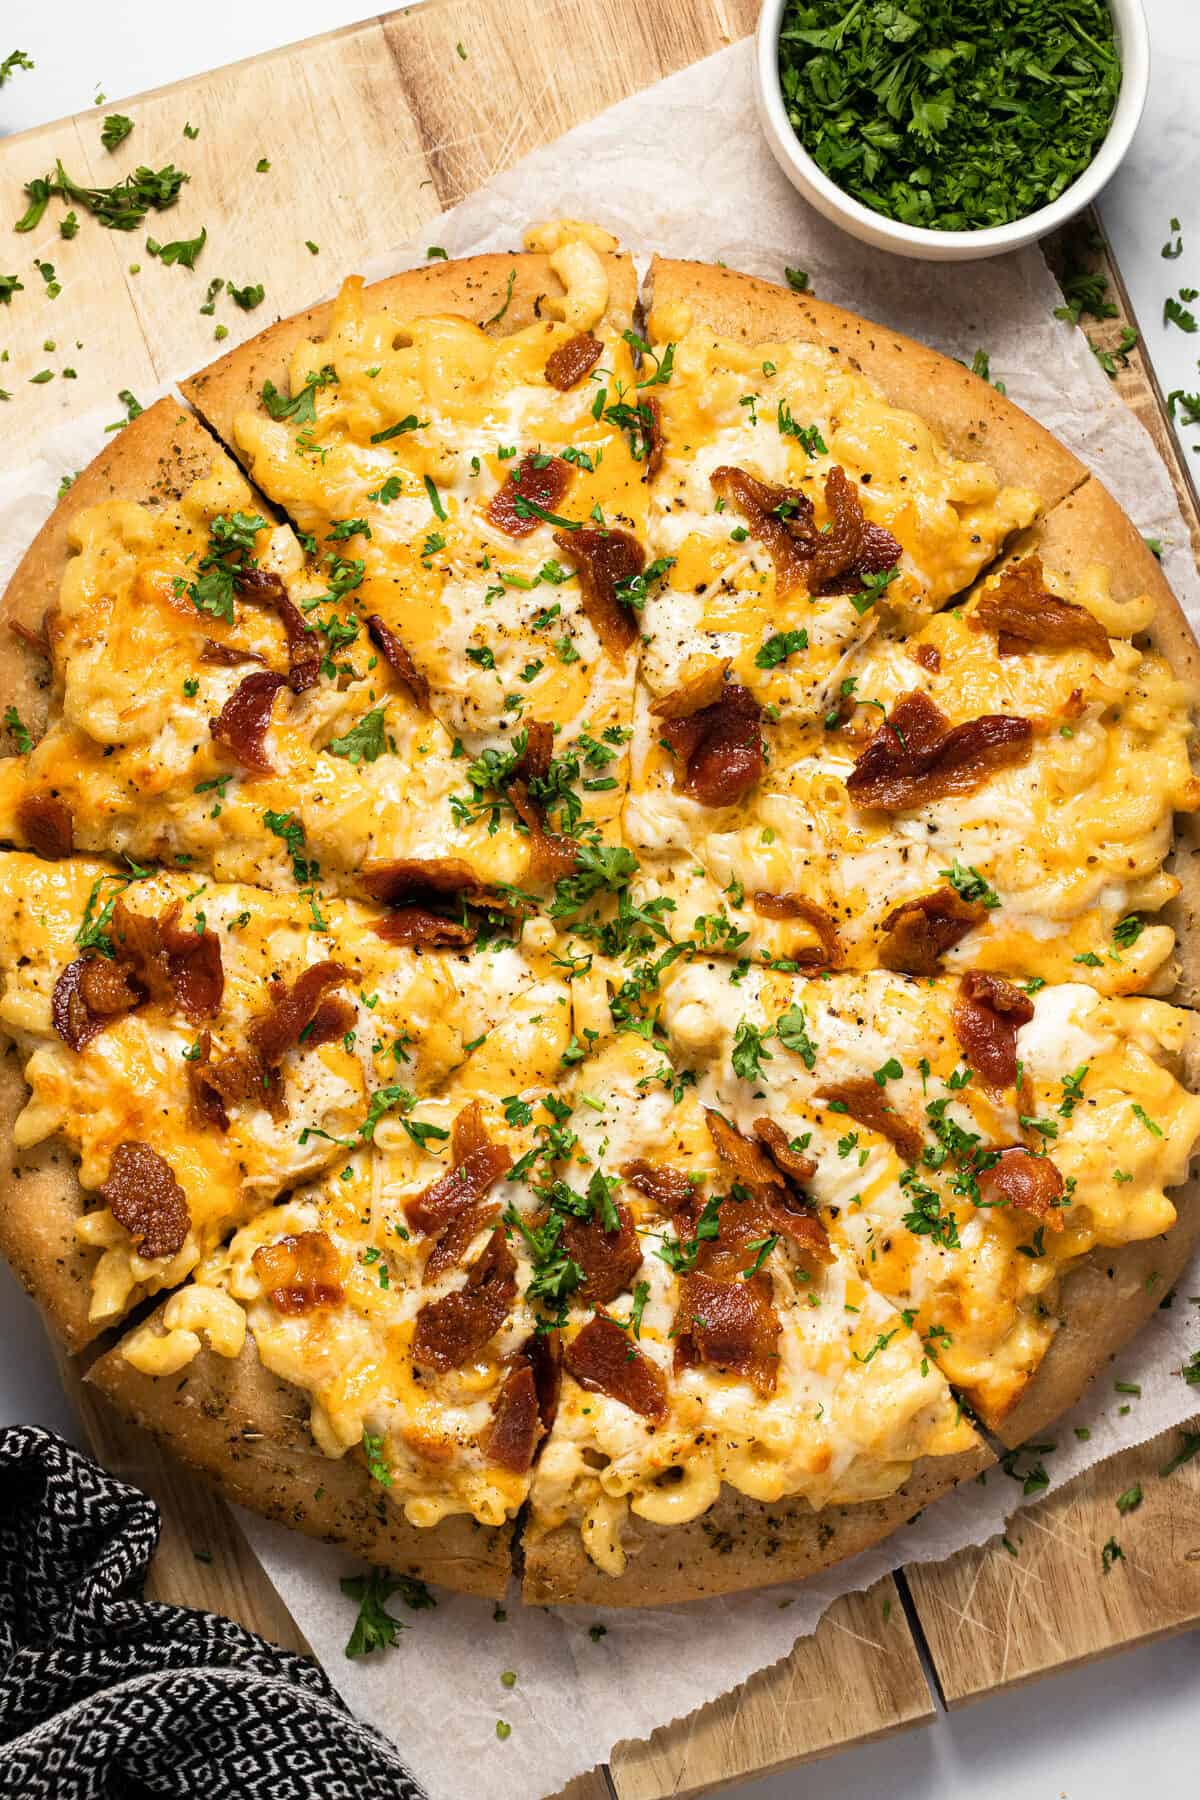 Homemade mac and cheese pizza on a wooden cutting board